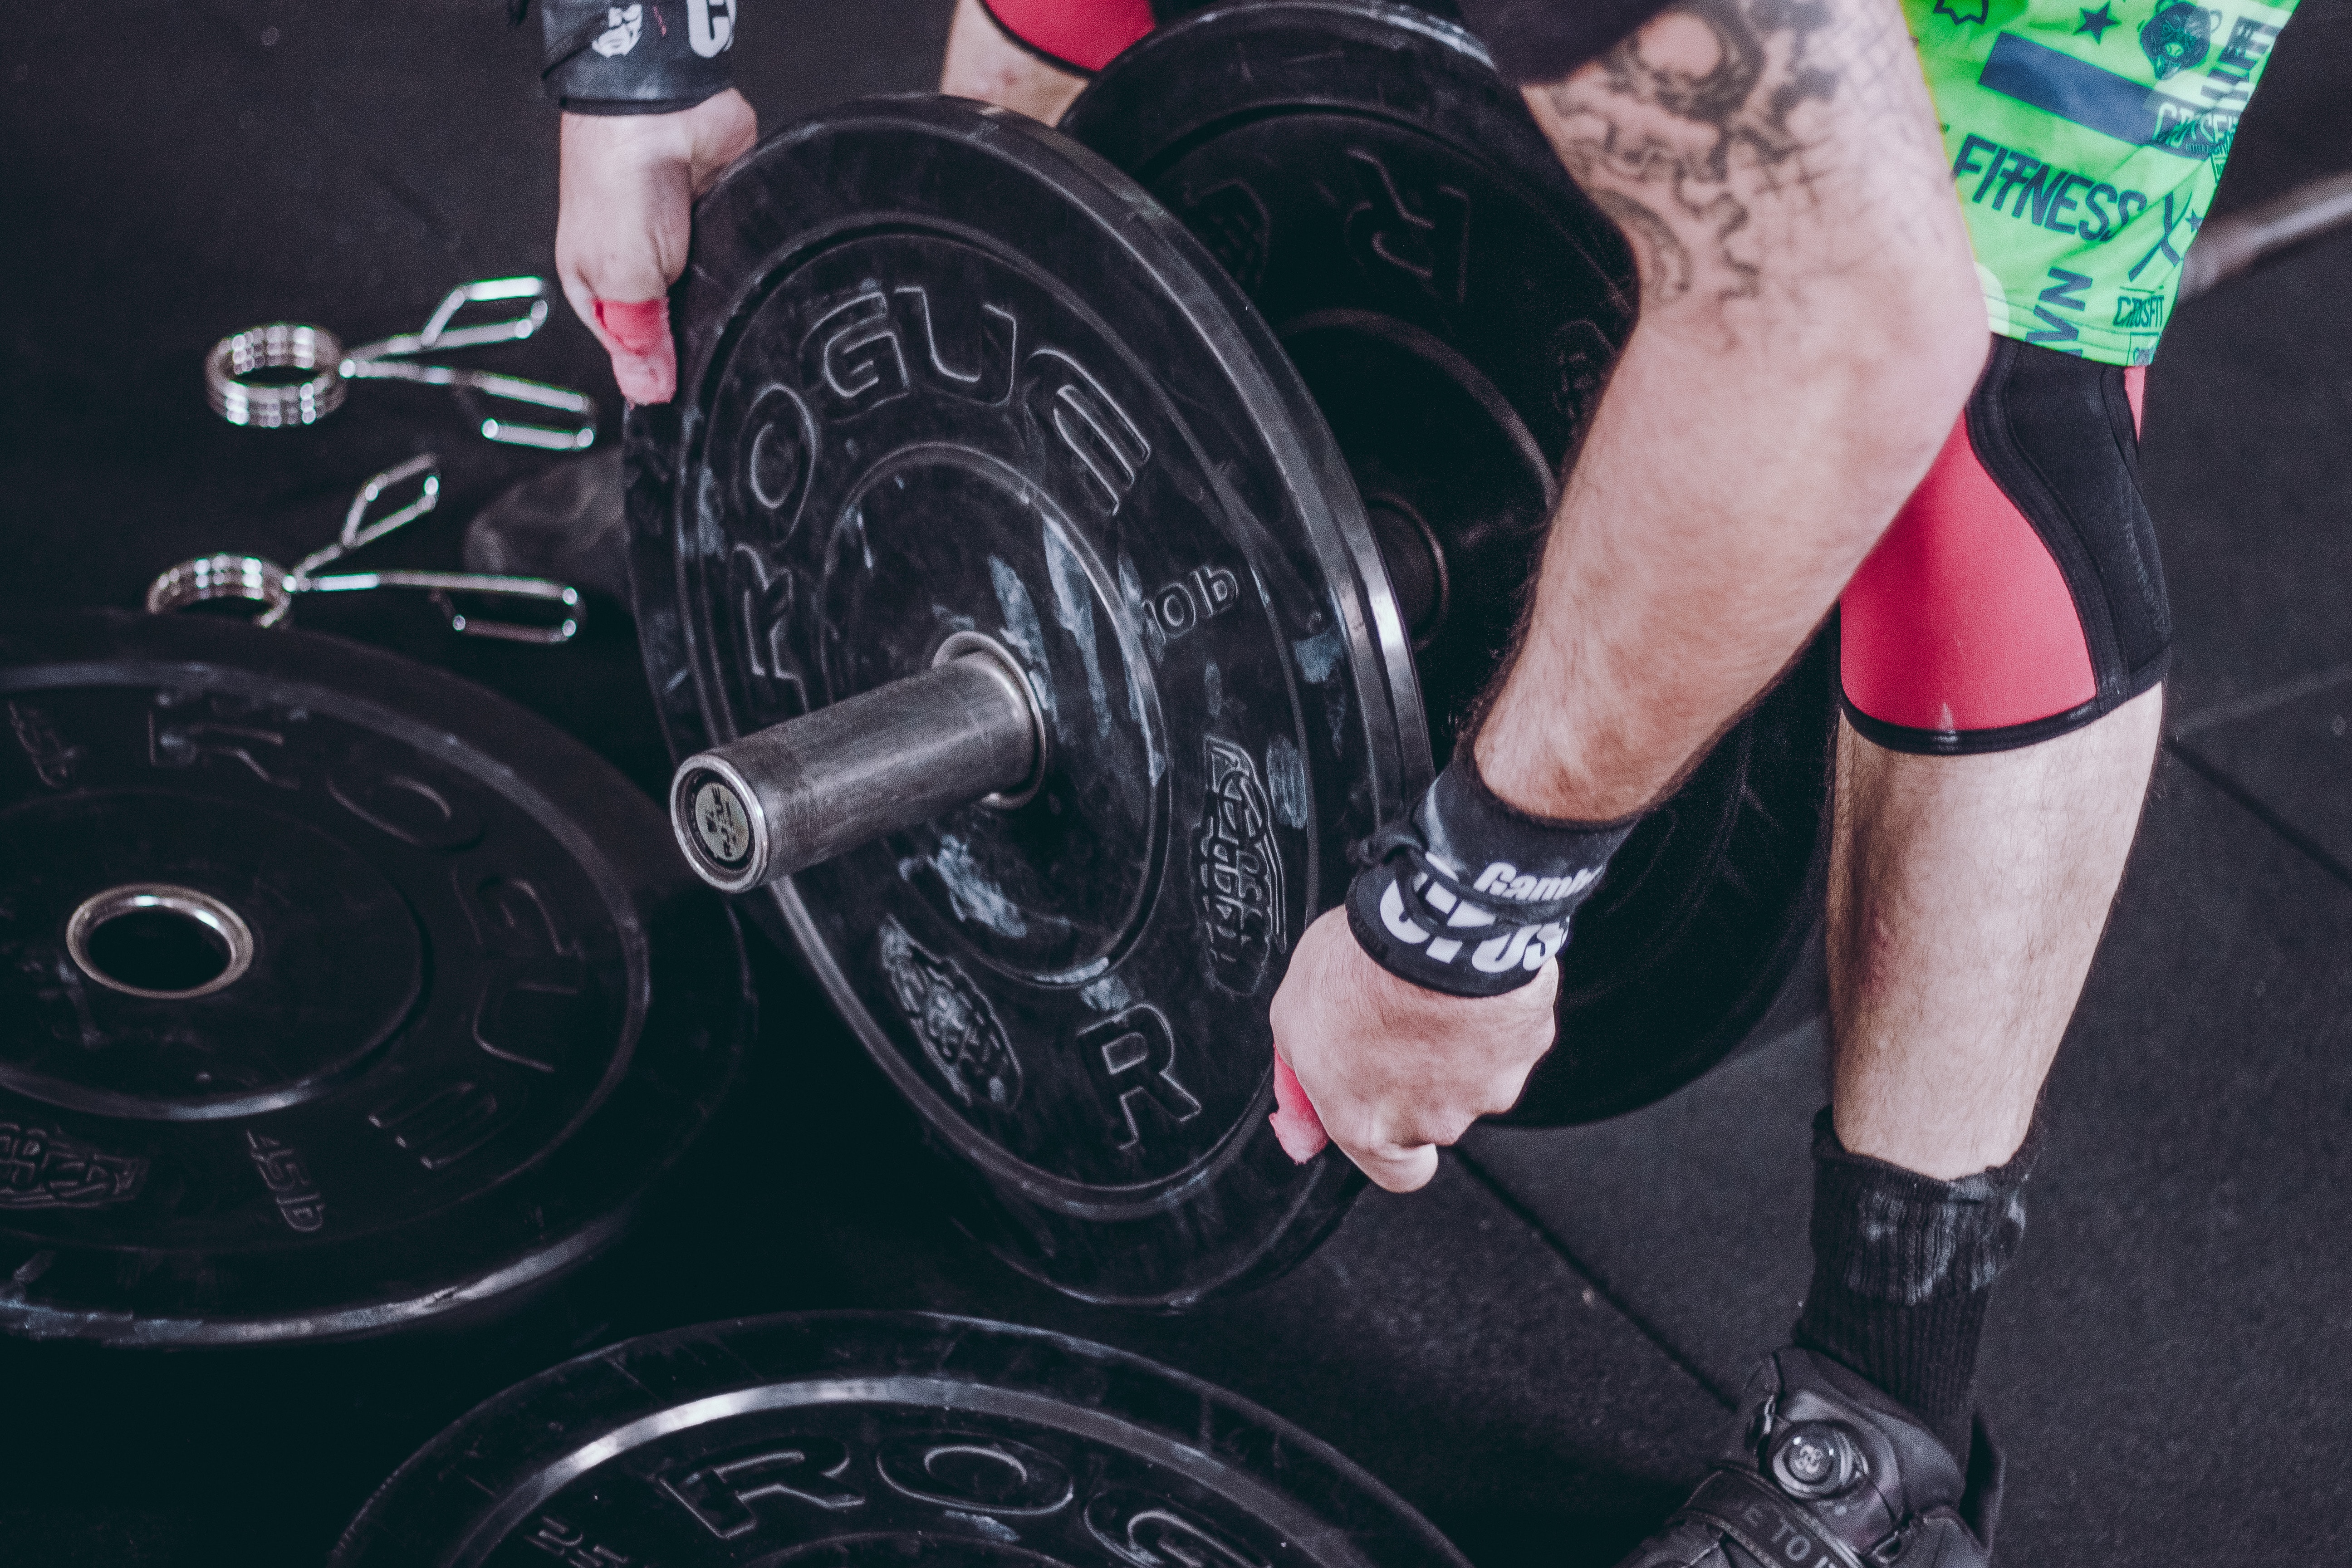 DVT in Your Calf: Is Lifting Weights Safe or Out?